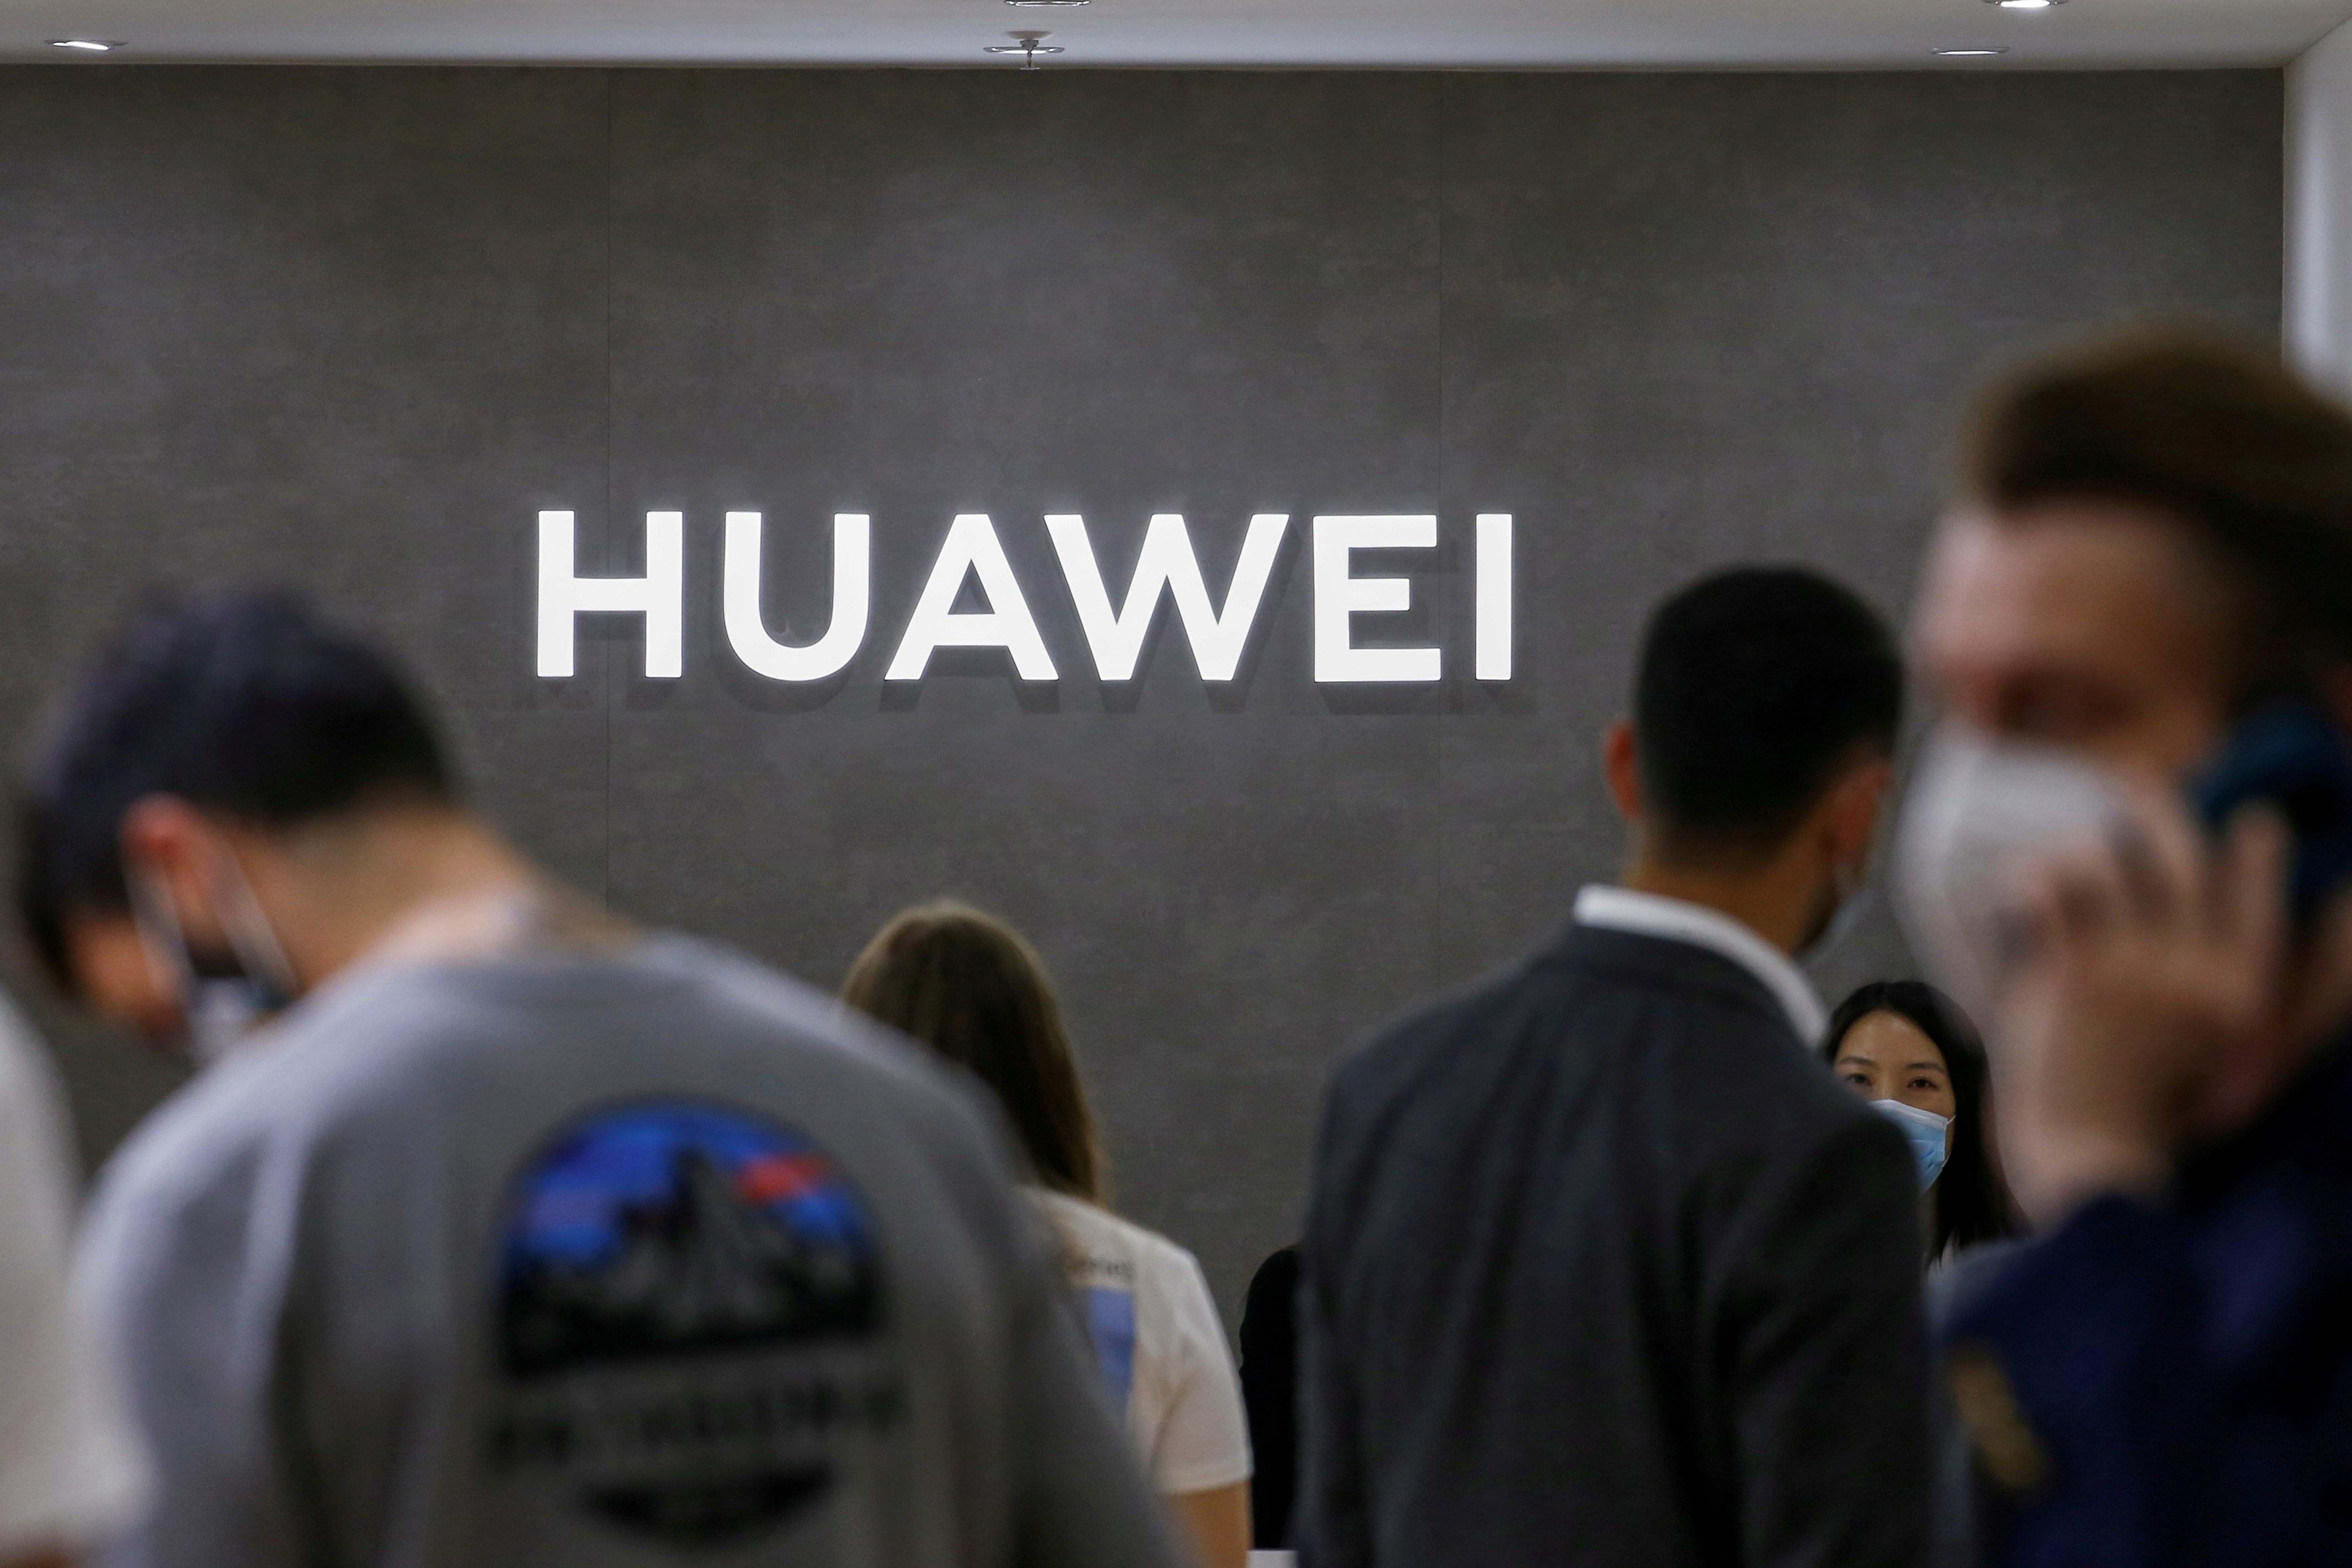 The Huawei logo is seen at the IFA consumer technology fair, amid the coronavirus disease (COVID-19) outbreak, in Berlin, Germany September 3, 2020.  REUTERS/Michele Tantussi